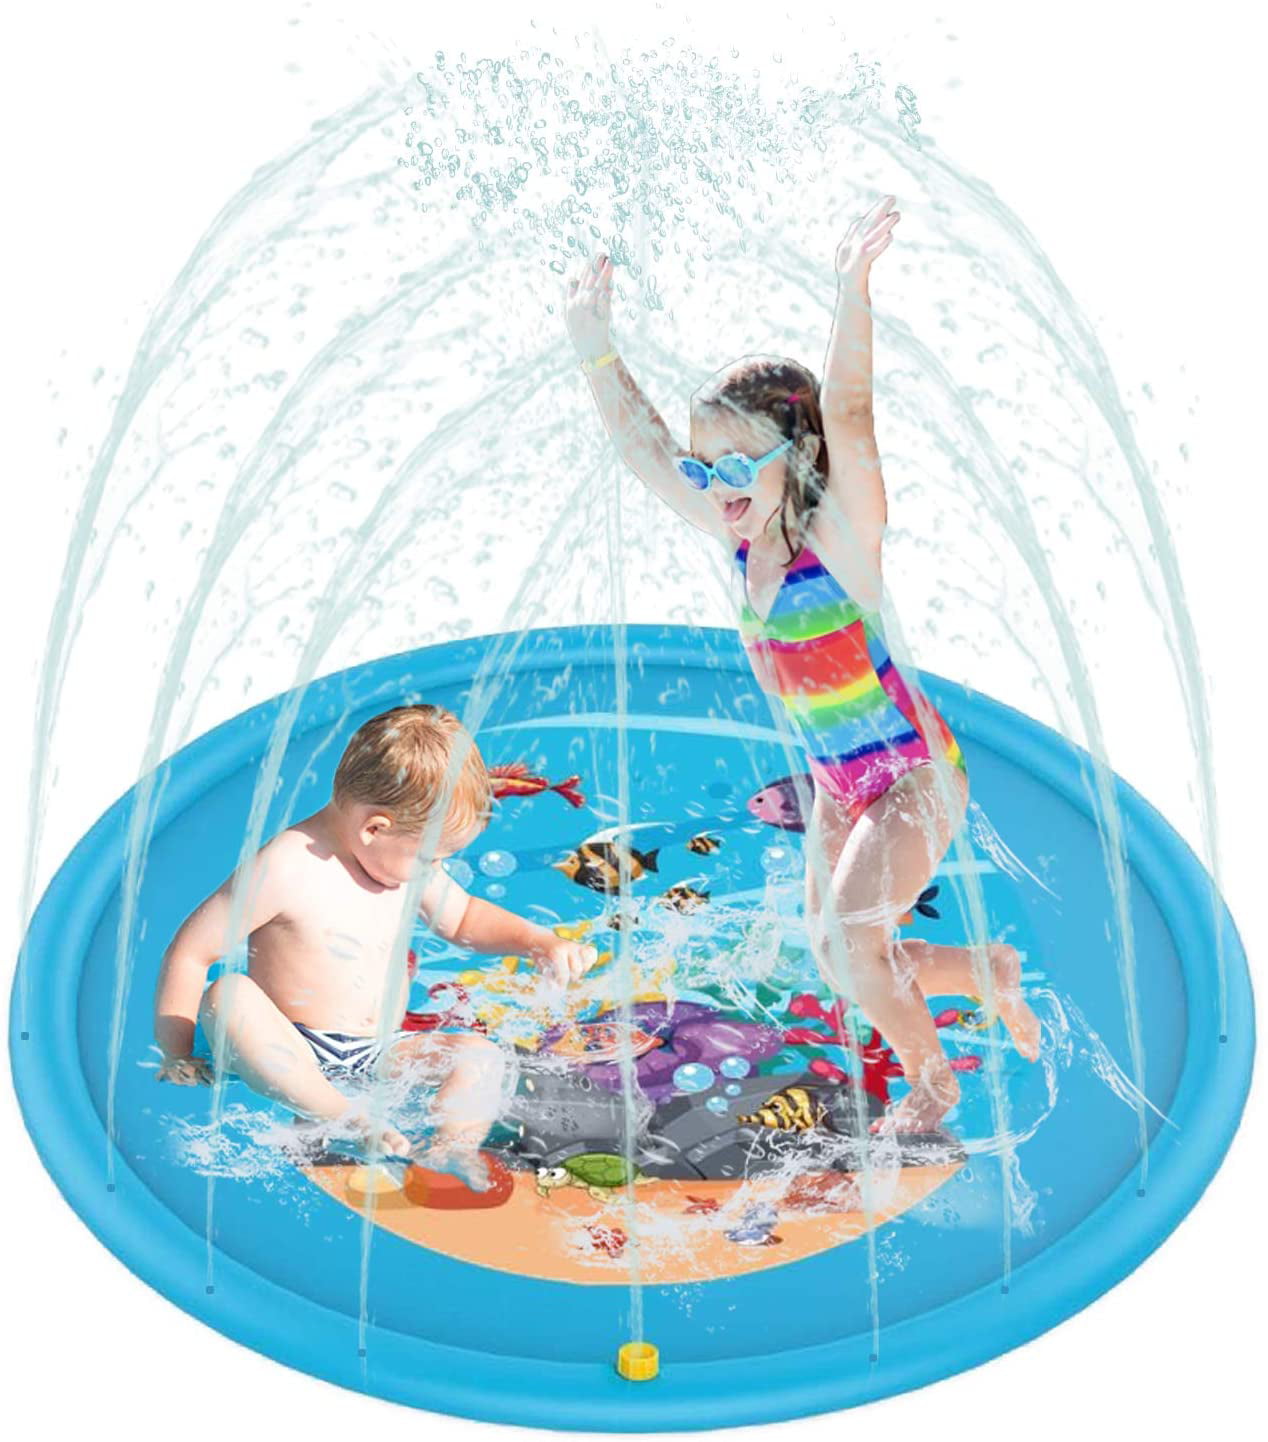 hirsrian Sprinkle and Splash Play Mat Summer Garden Outdoor Spray Toys Inflatable Sprinkler Mat for Toddlers Kids Pets